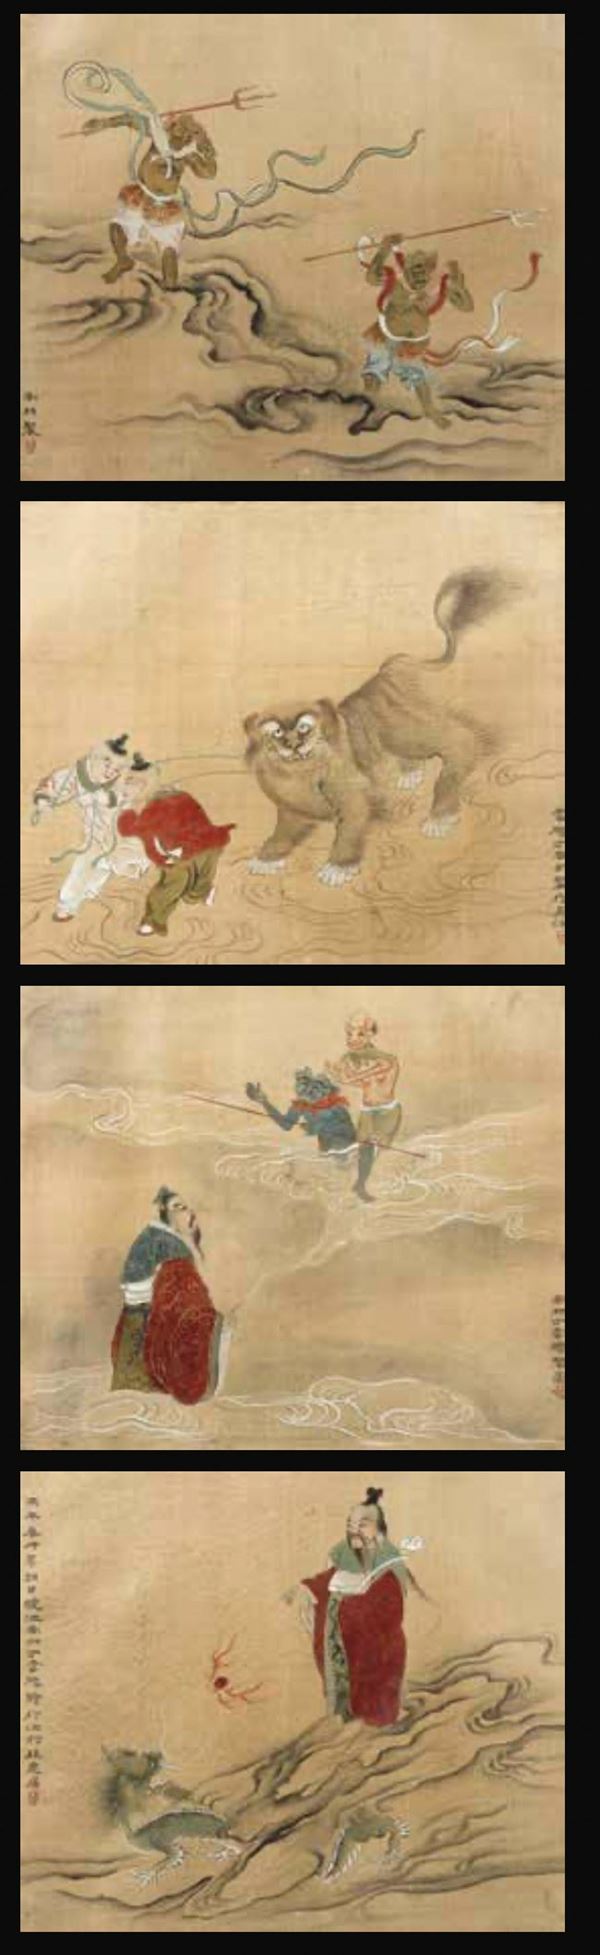 Four paintings on silk, China, Qing Dynasty